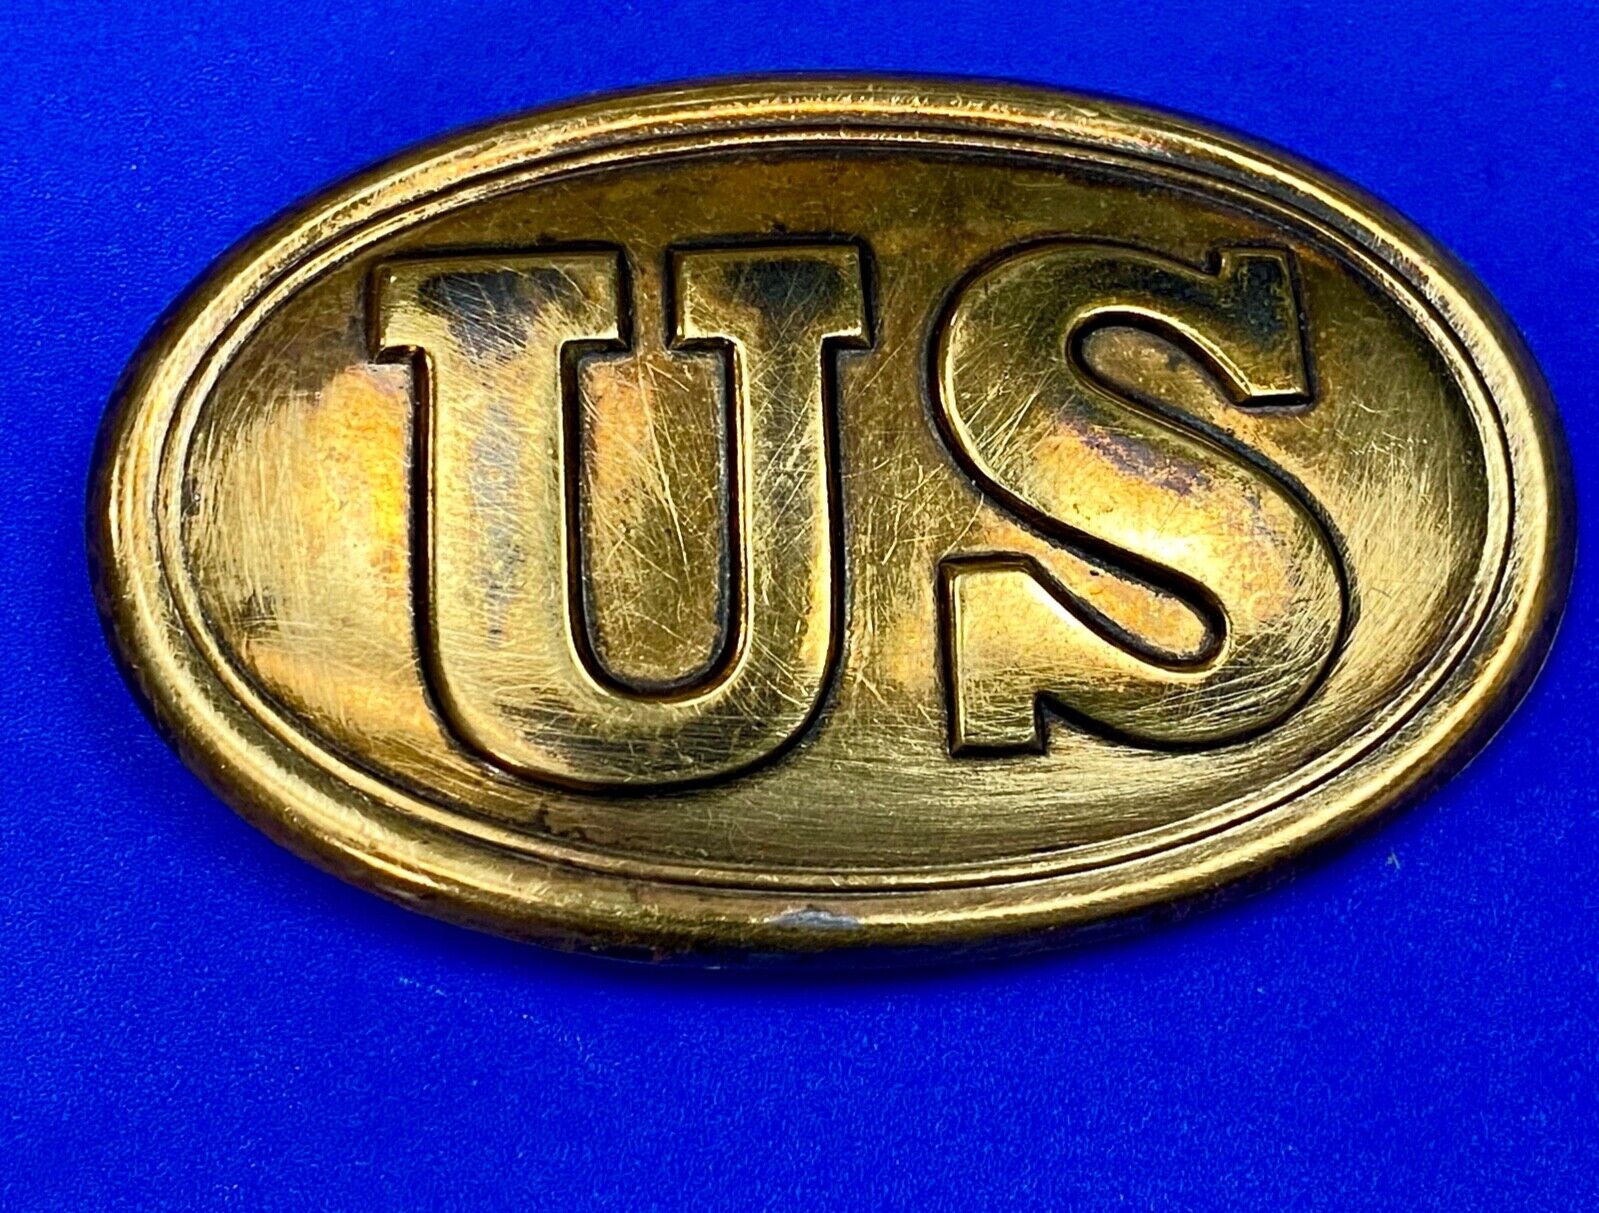 US Civil War Infantry Soldiers U.S. Union Army Soldier Belt Buckle reproduction